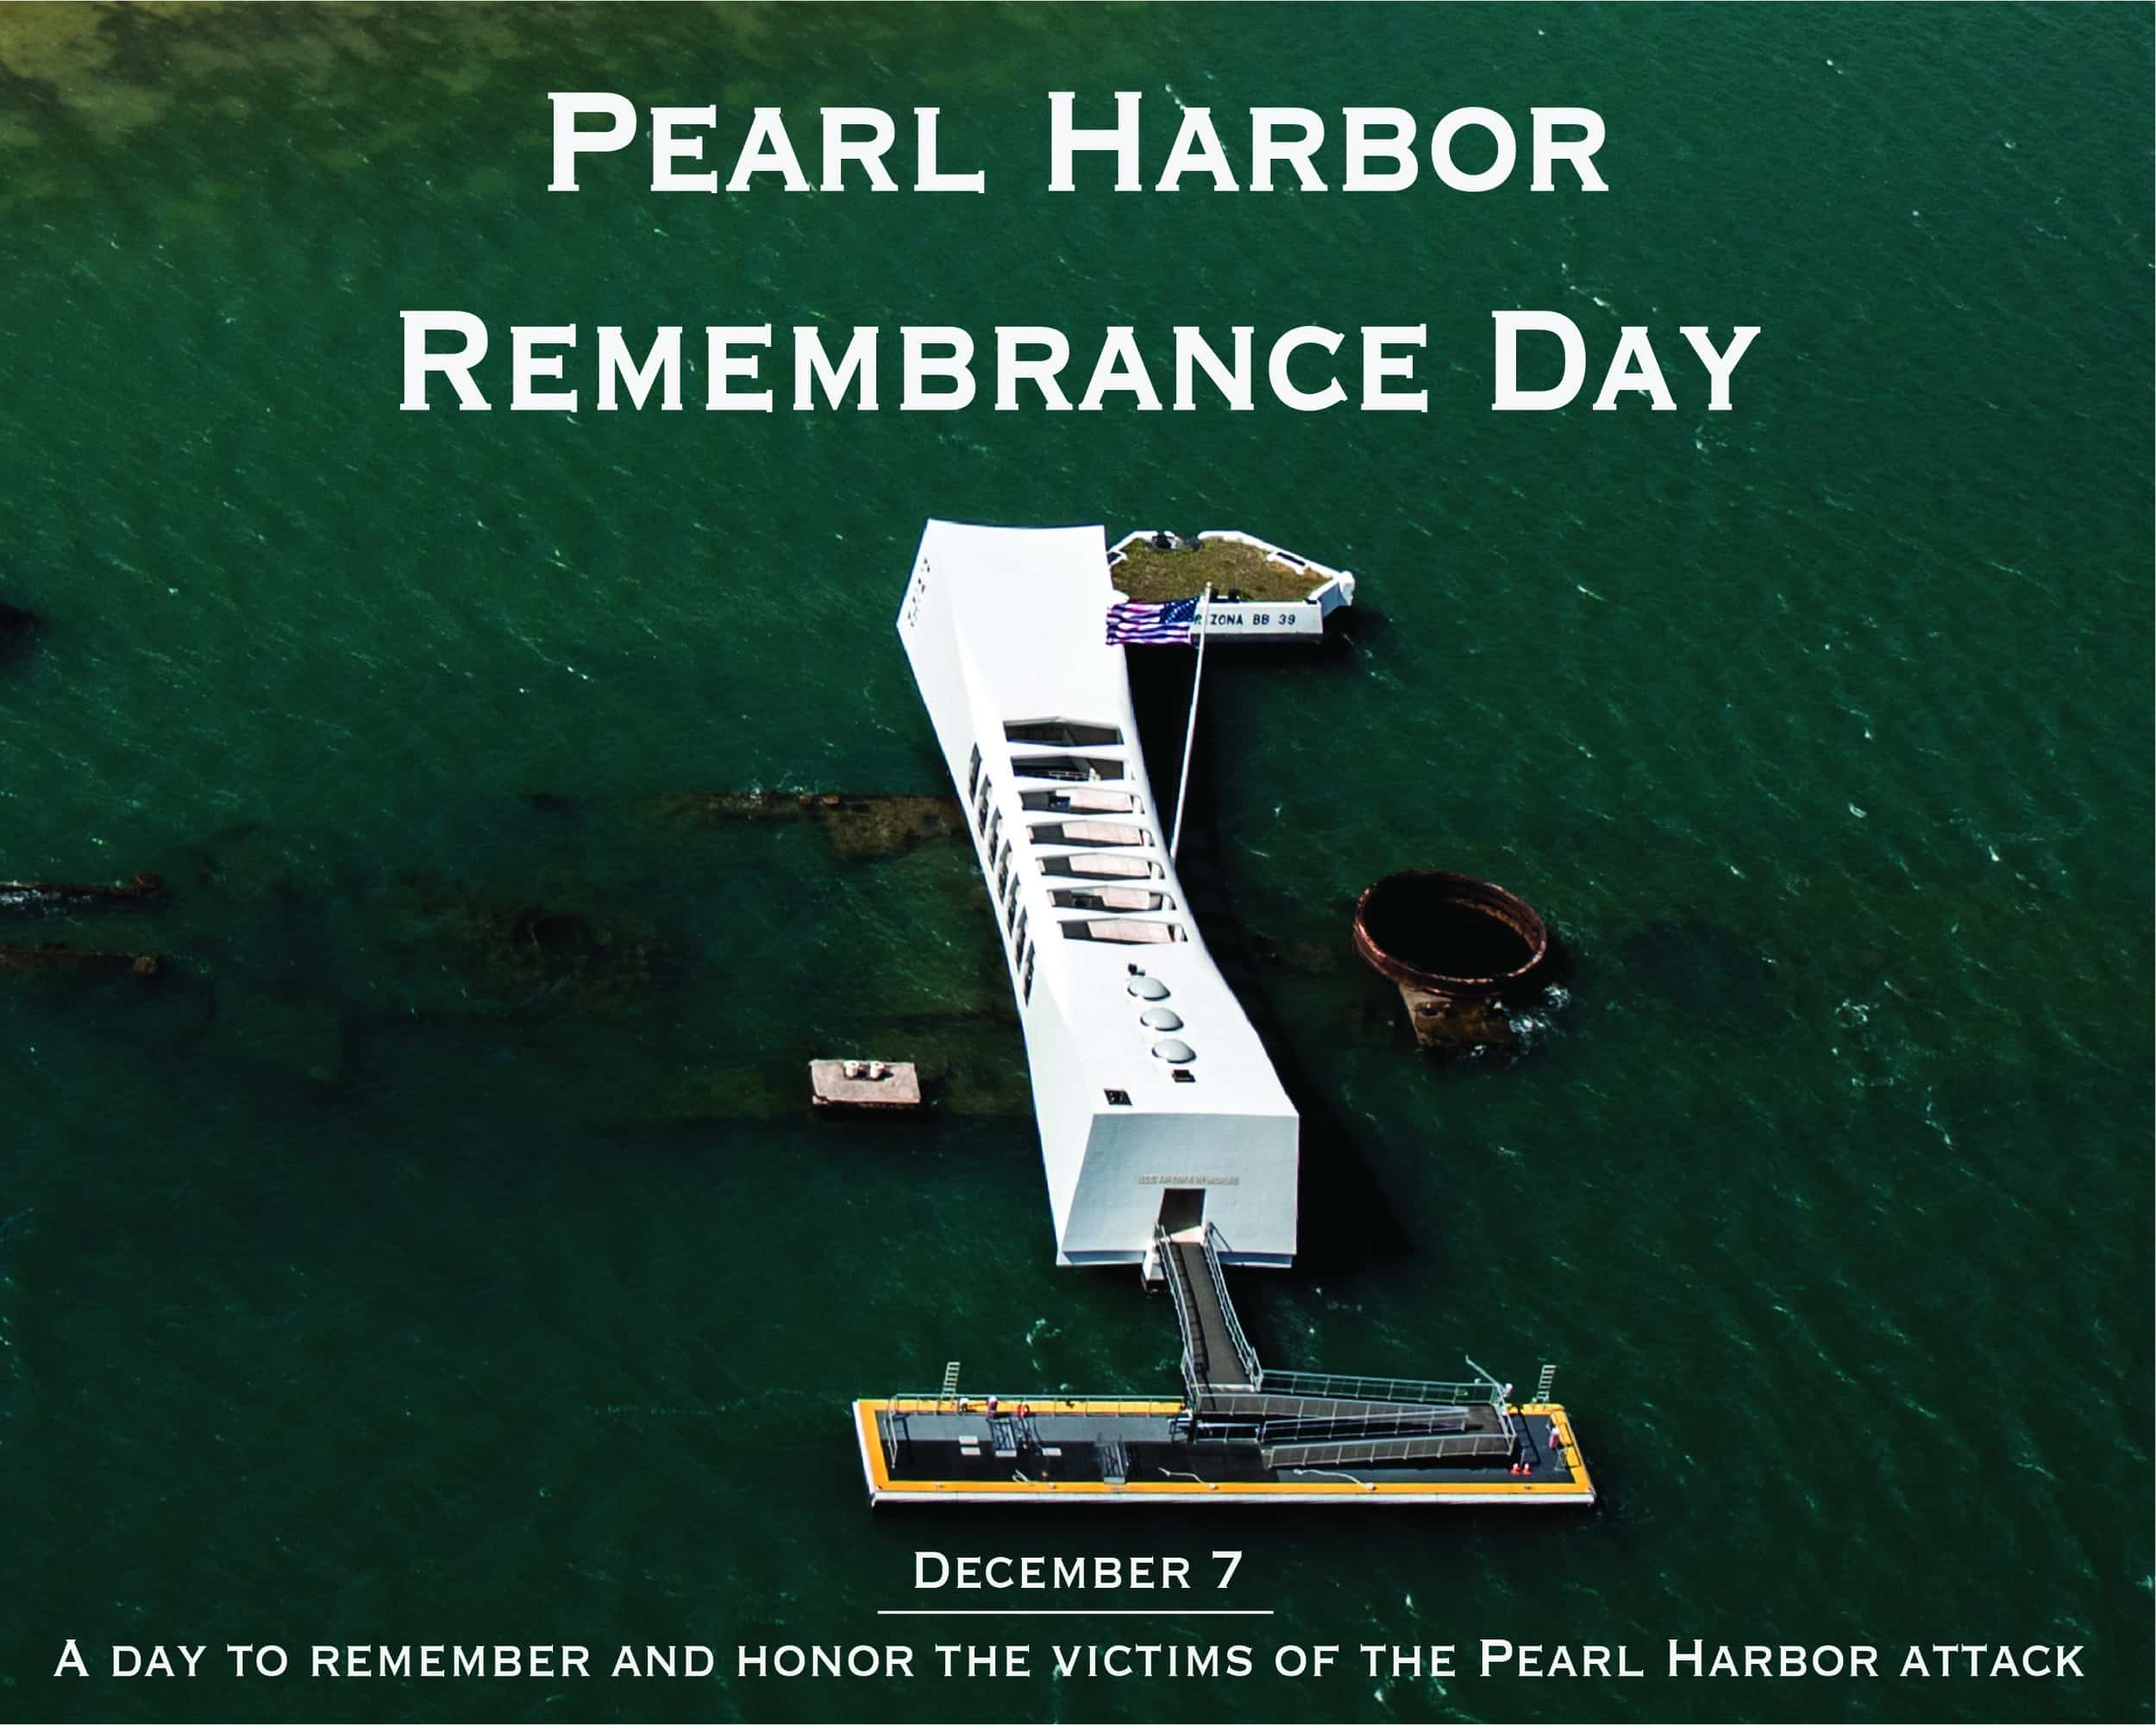 Dec. 7 is set as a day to remember the service members and civilians who lost their lives in the attack on Pearl Harbor. December 7, 2019 marks 78 years since the attack. 2,403 were killed and 1,178 were injured in the attack. The USS Arizona and US